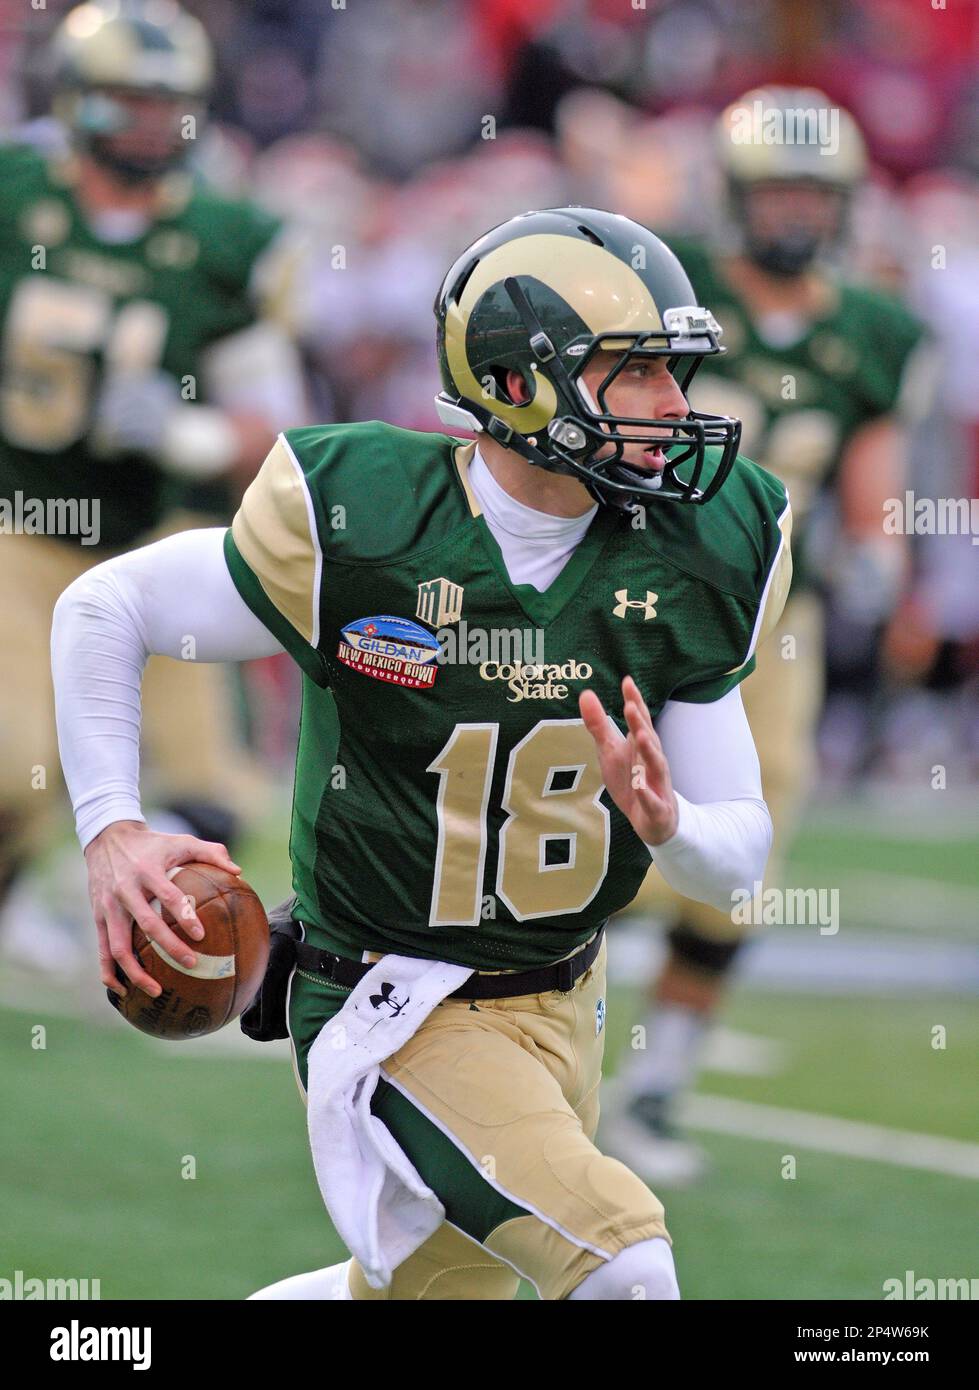 Grayson Rams to be Featured on ESPNU